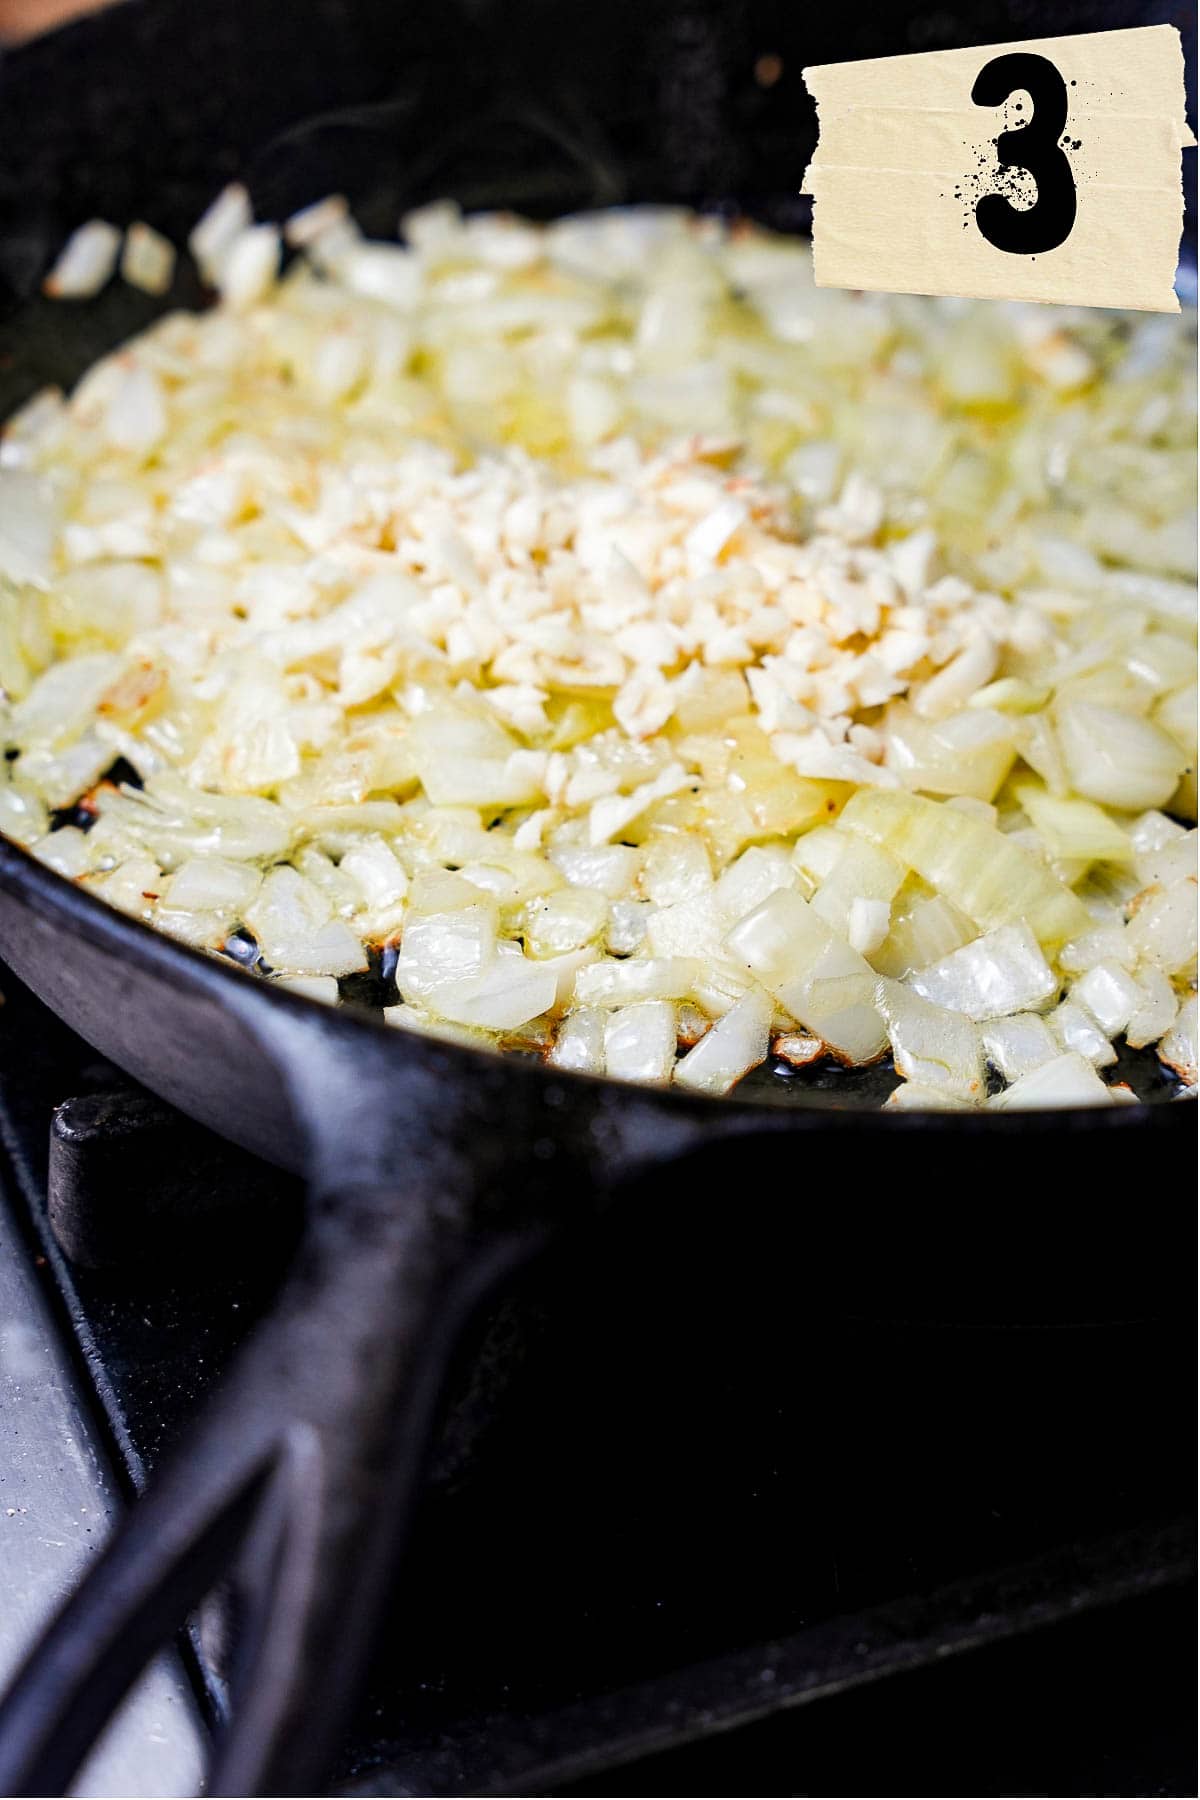 Onions and garlic sauté in a cast iron skillet.